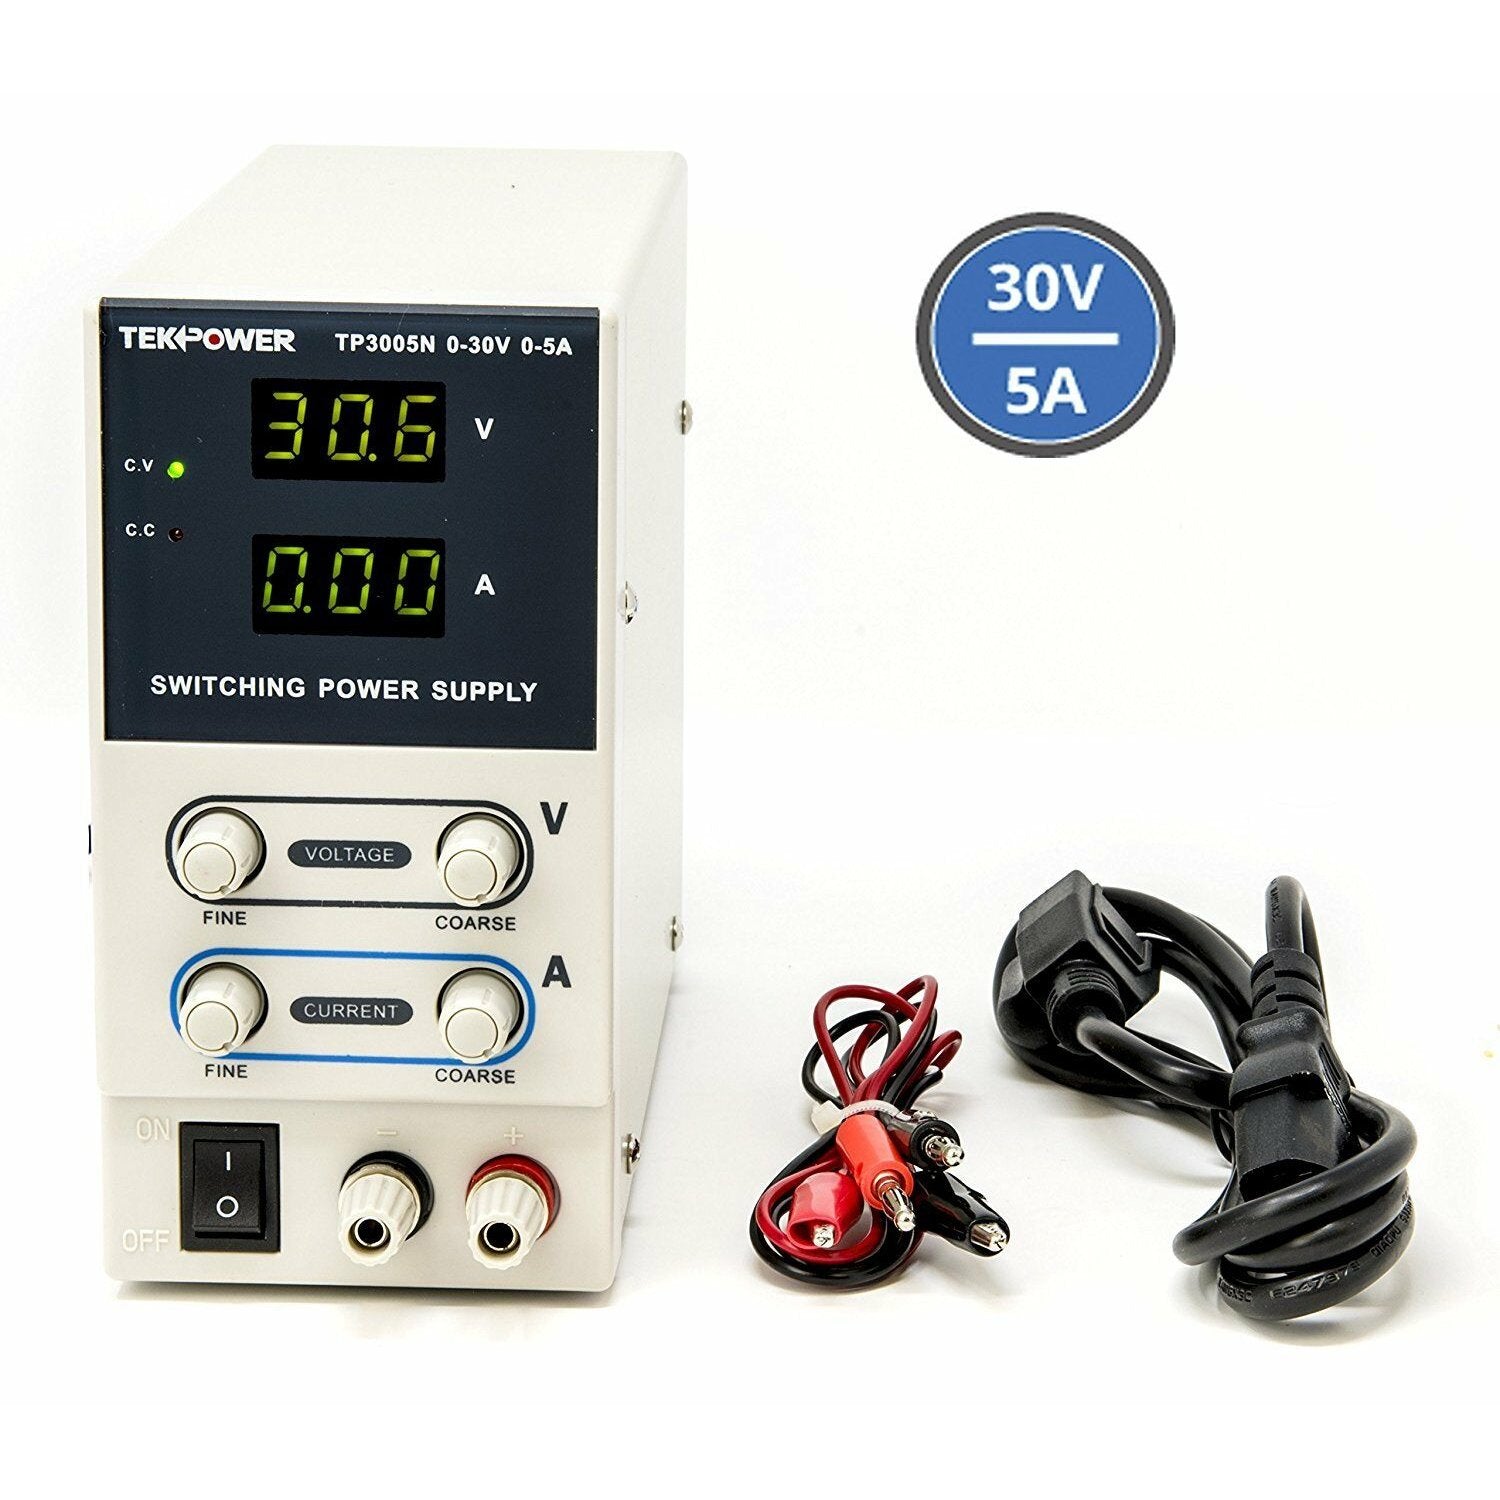 Tekpower Regulated Power Supply 0 30V at 0 - 5A – Kaito Electronic Inc